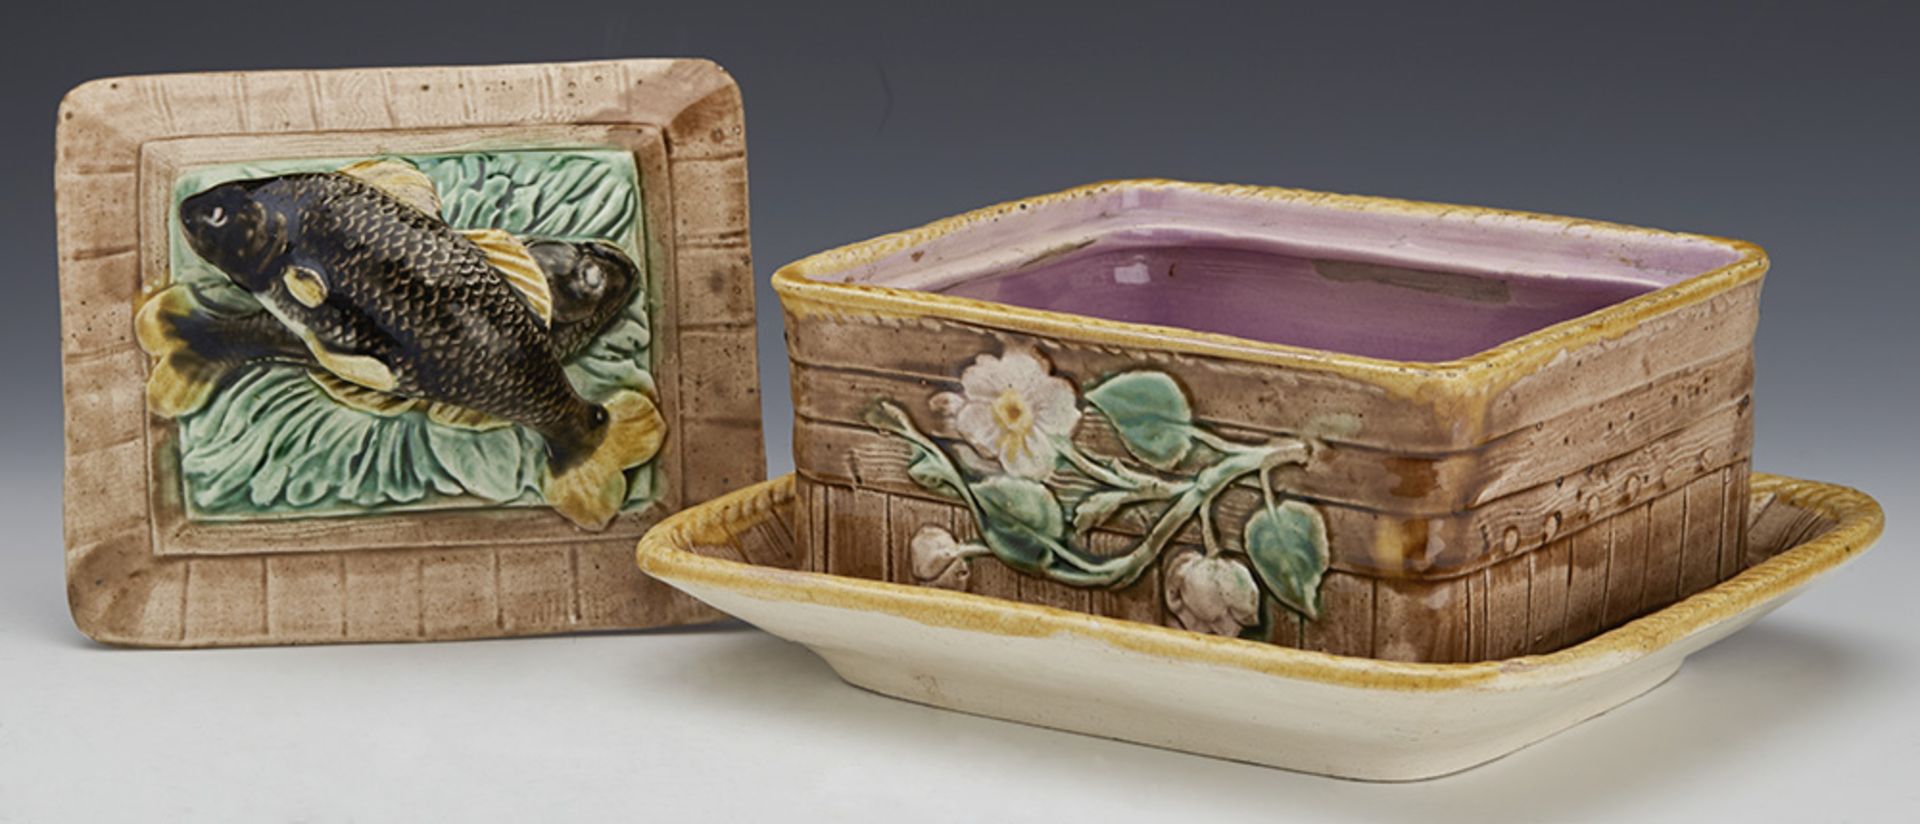 ANTIQUE ENGLISH MAJOLICA SARDINE DISH WITH FISH AND FLOWERS C.1865 - Image 5 of 10